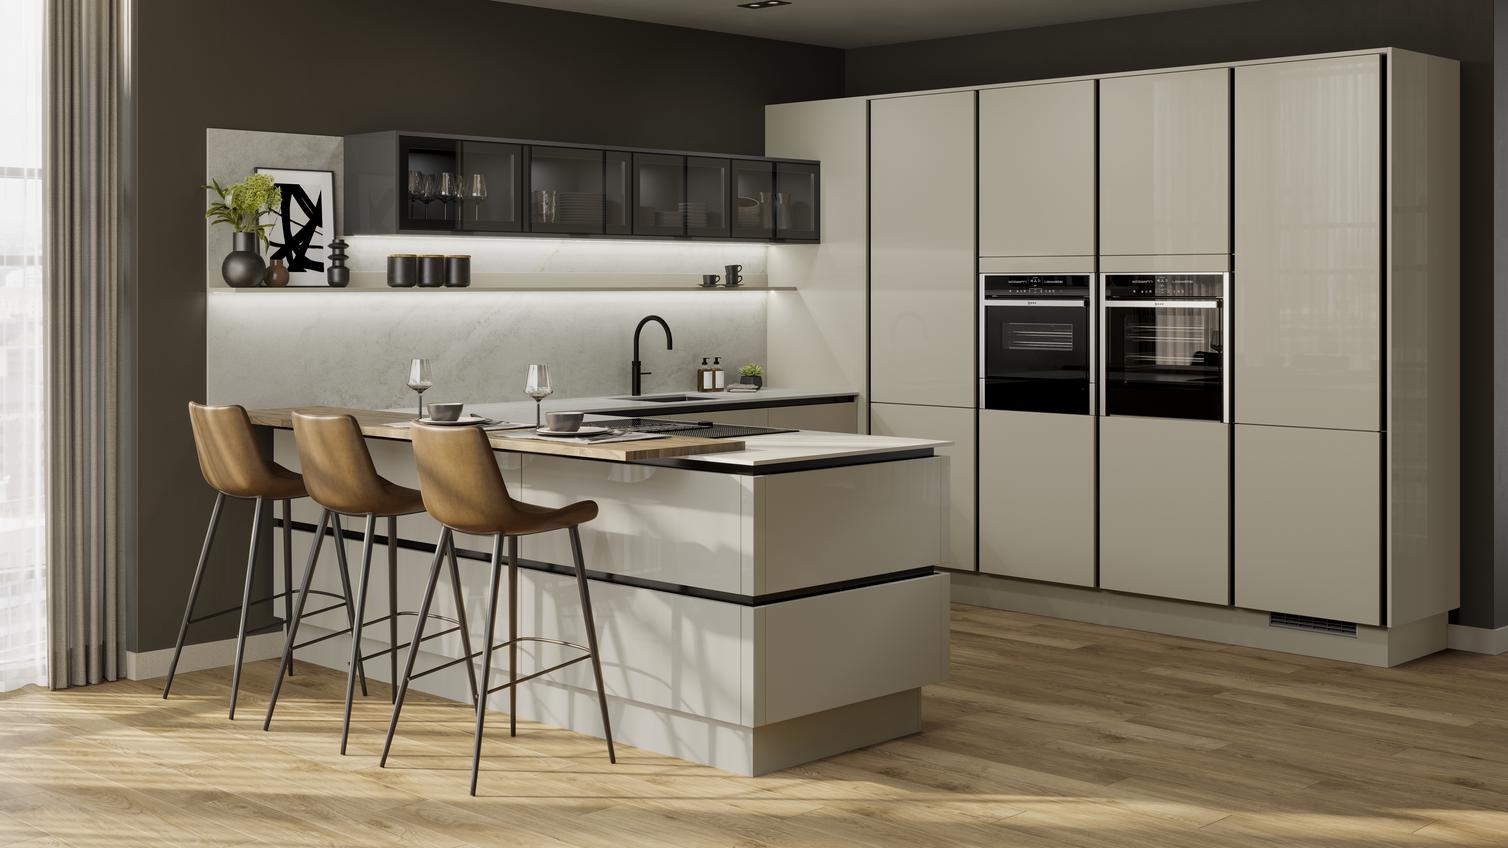 Peninsular kitchen layout with neutral slab doors in a glossy finish. Has handleless units and black trims for a modern look